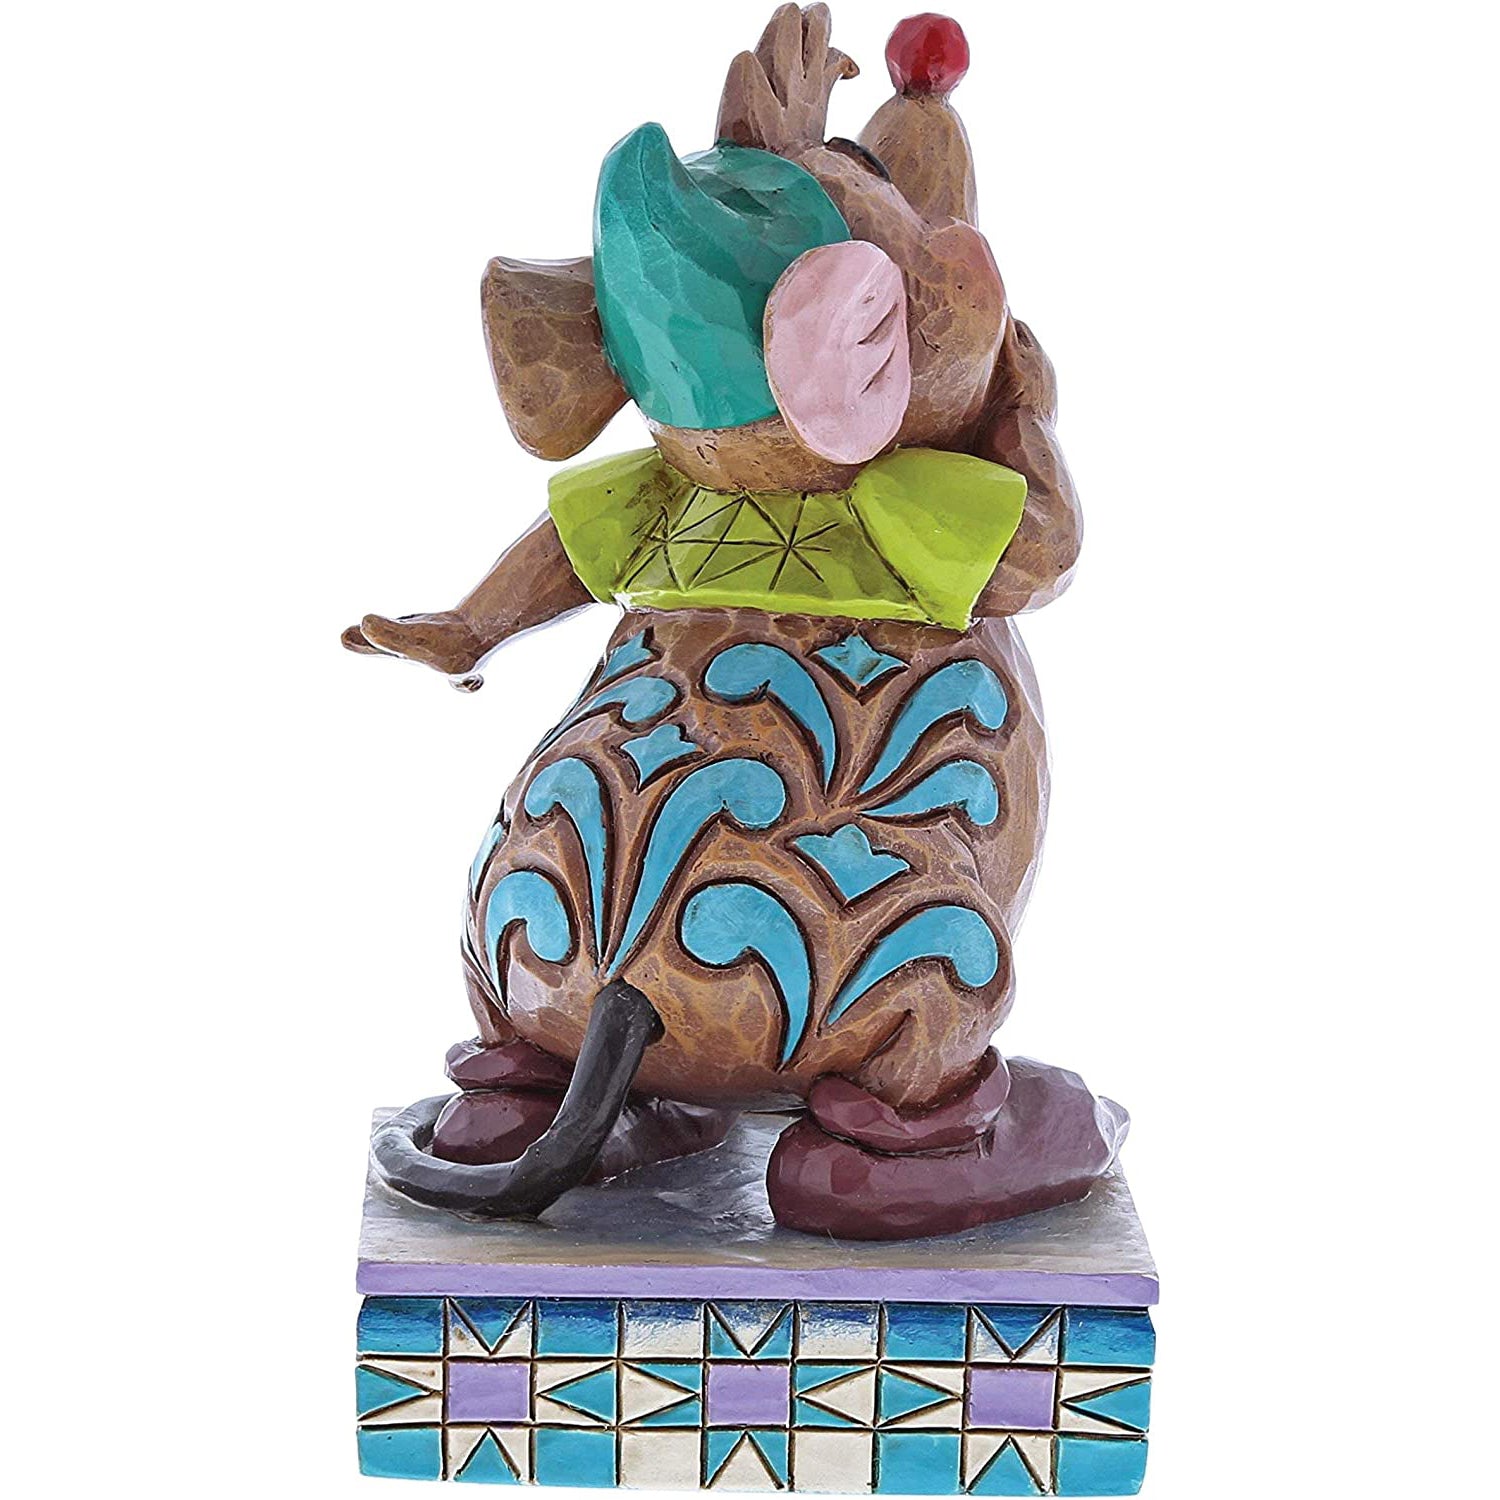 Gus-Figur-Disney-Traditions-by-Jim-Shore-Berlindeluxe-hut-schuhe-seite